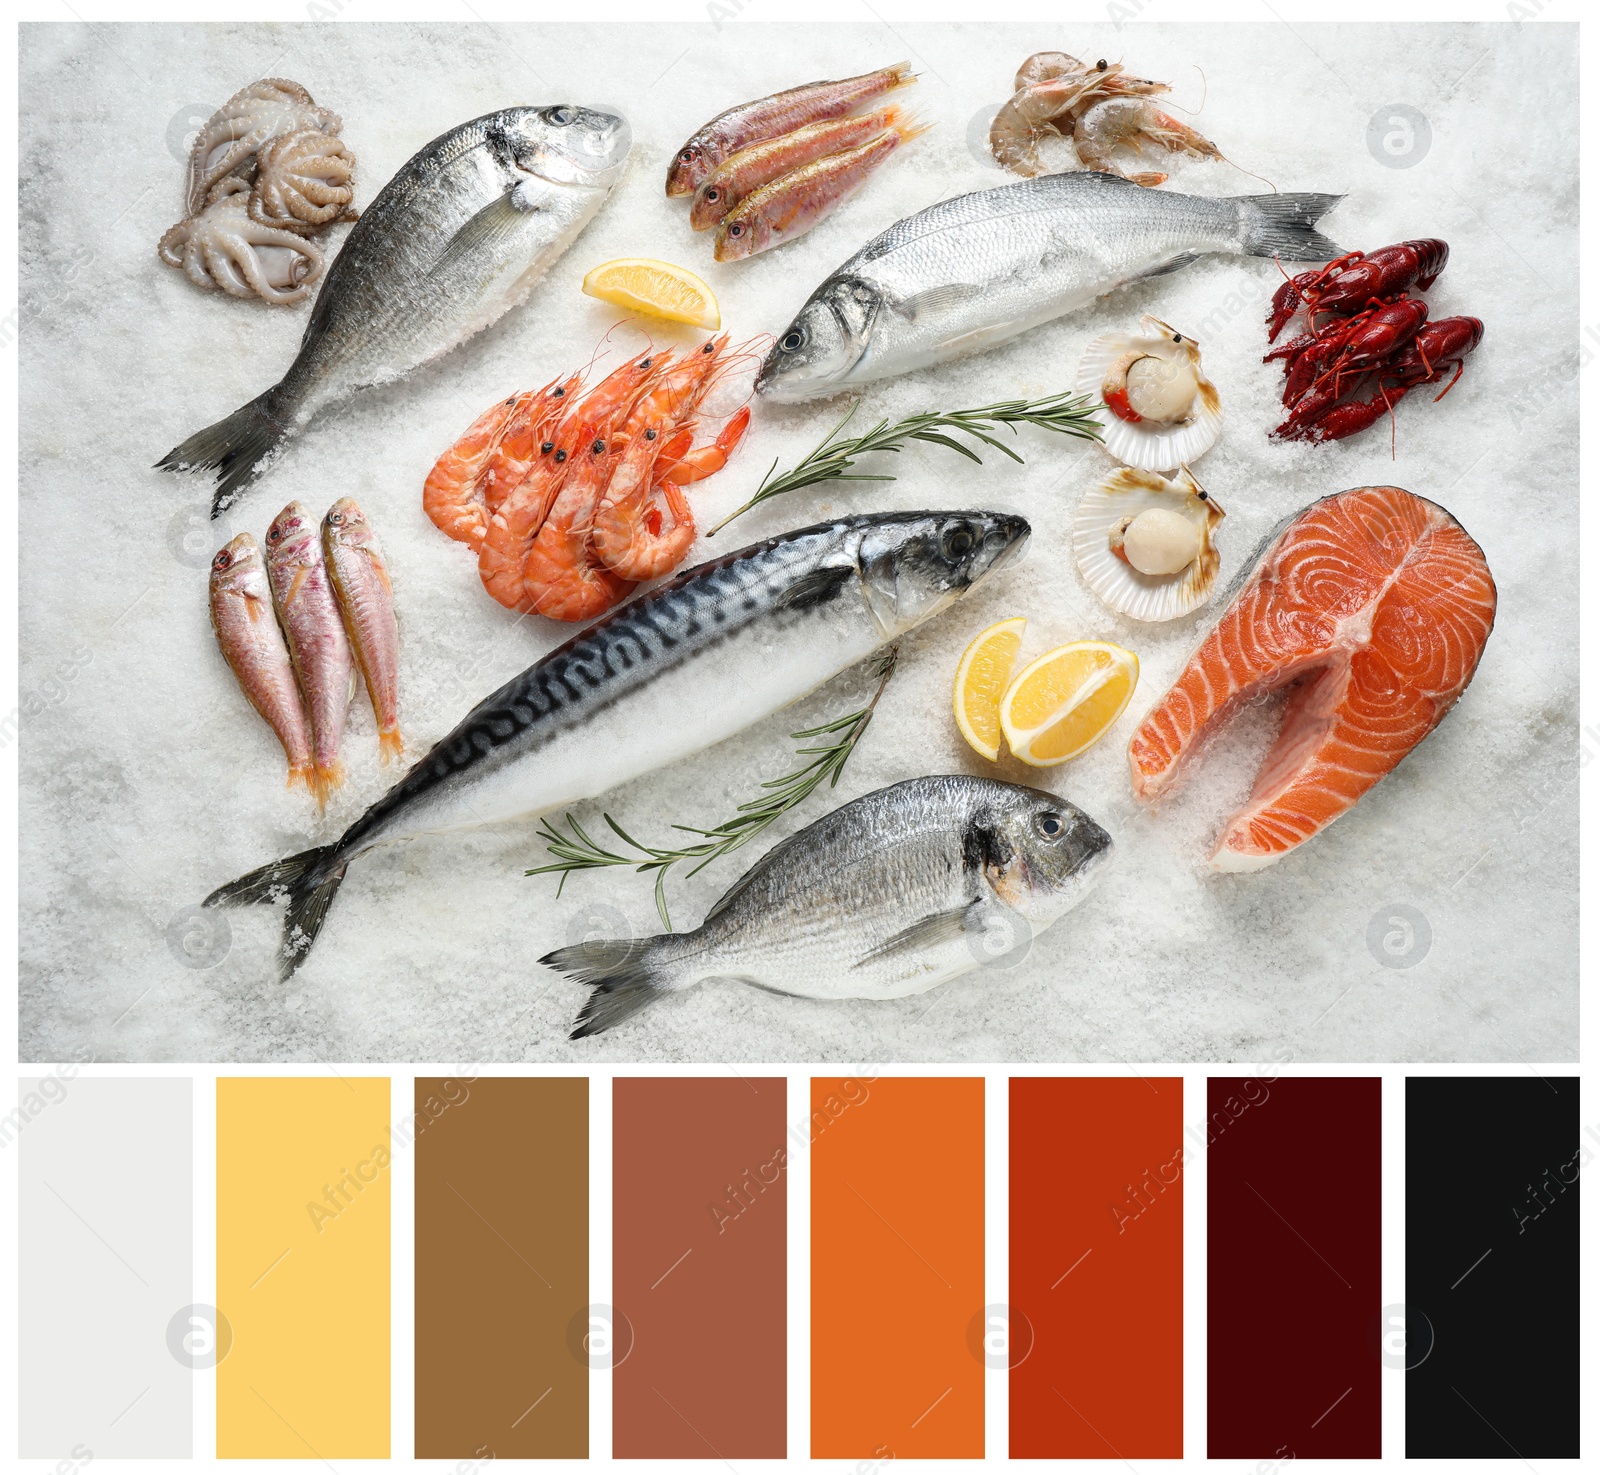 Image of Top view of fresh fish and seafood on ice and color palette. Collage